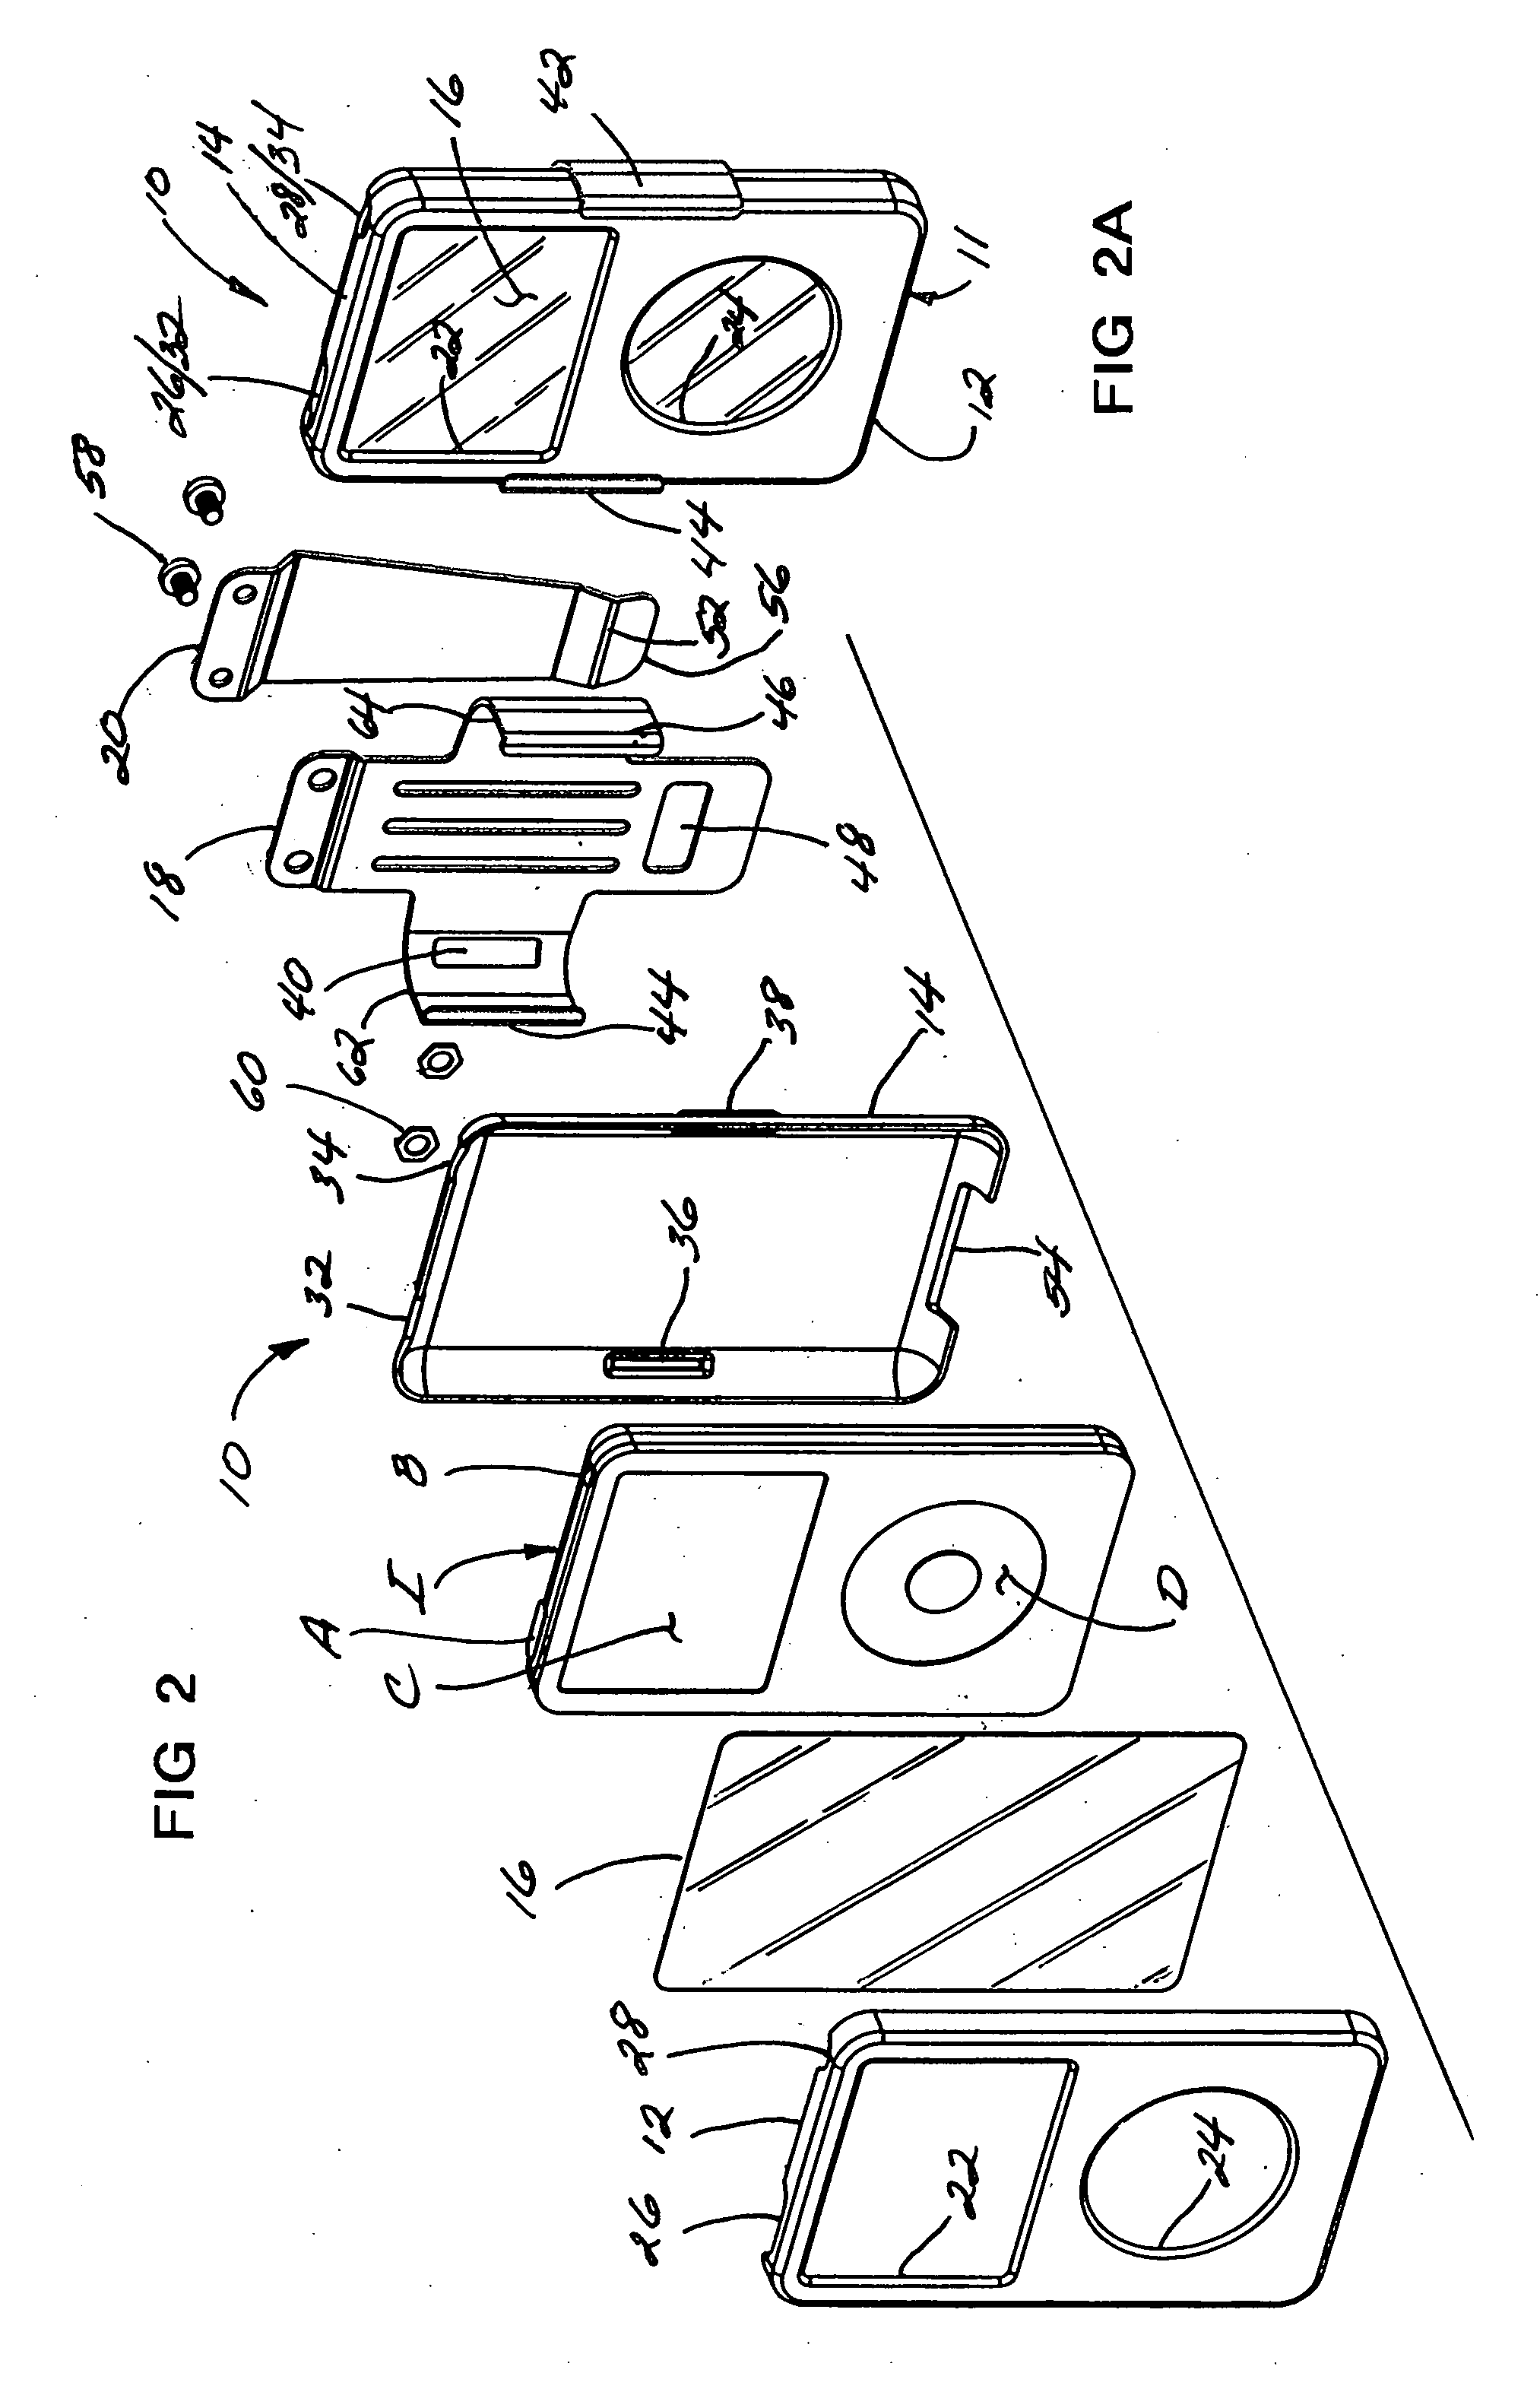 Protective enclosure for personal electronic devices